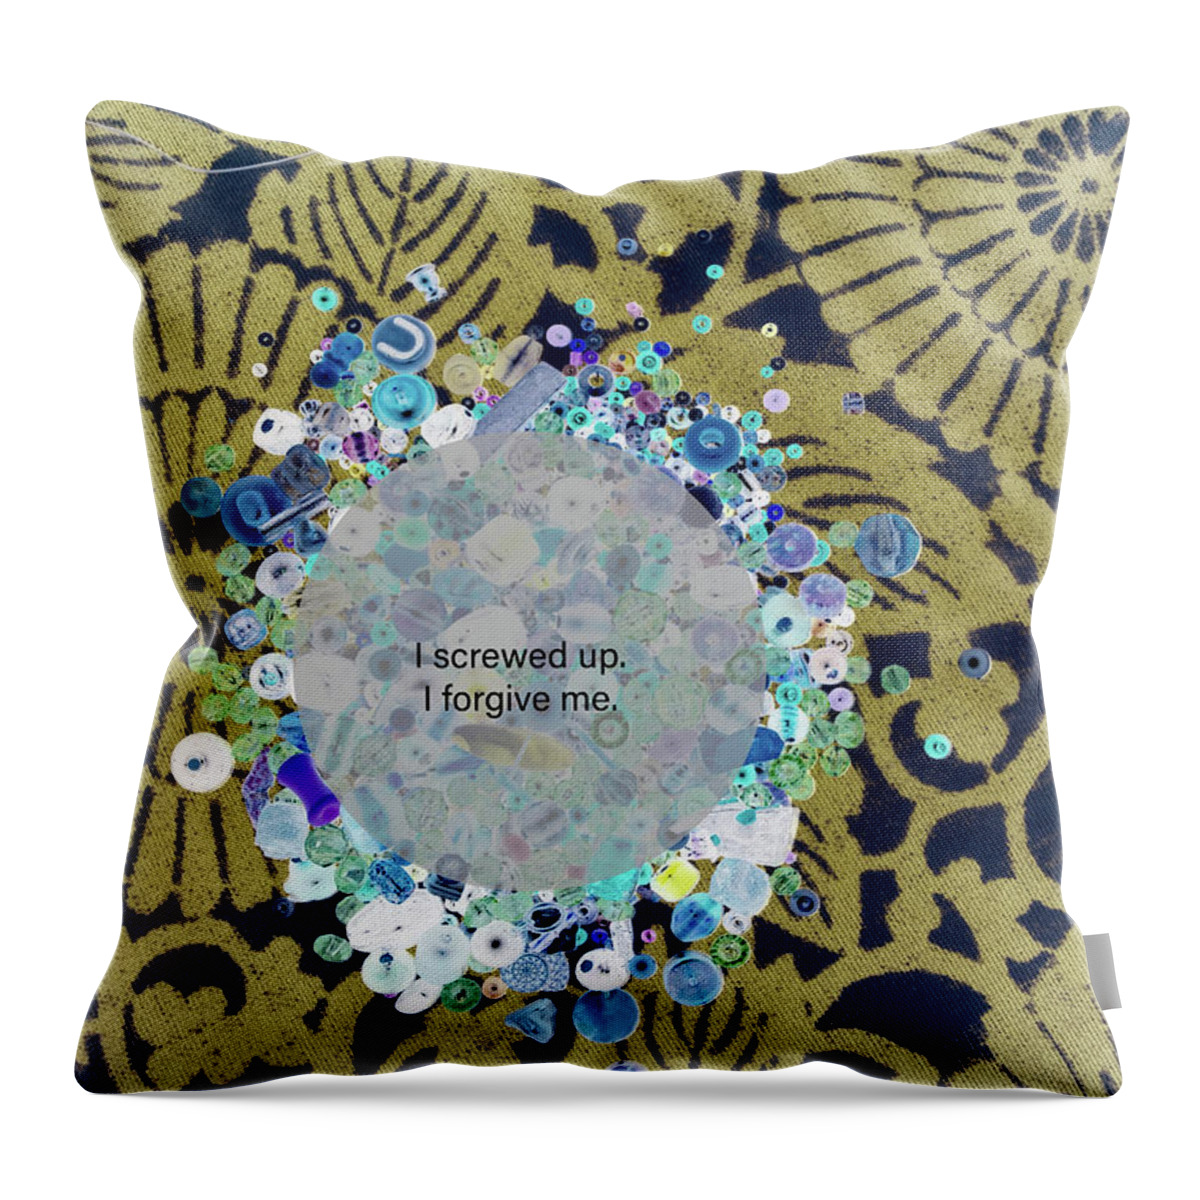 Forgiveness Throw Pillow featuring the painting I screwed up I forgive me by Laura Pierre-Louis